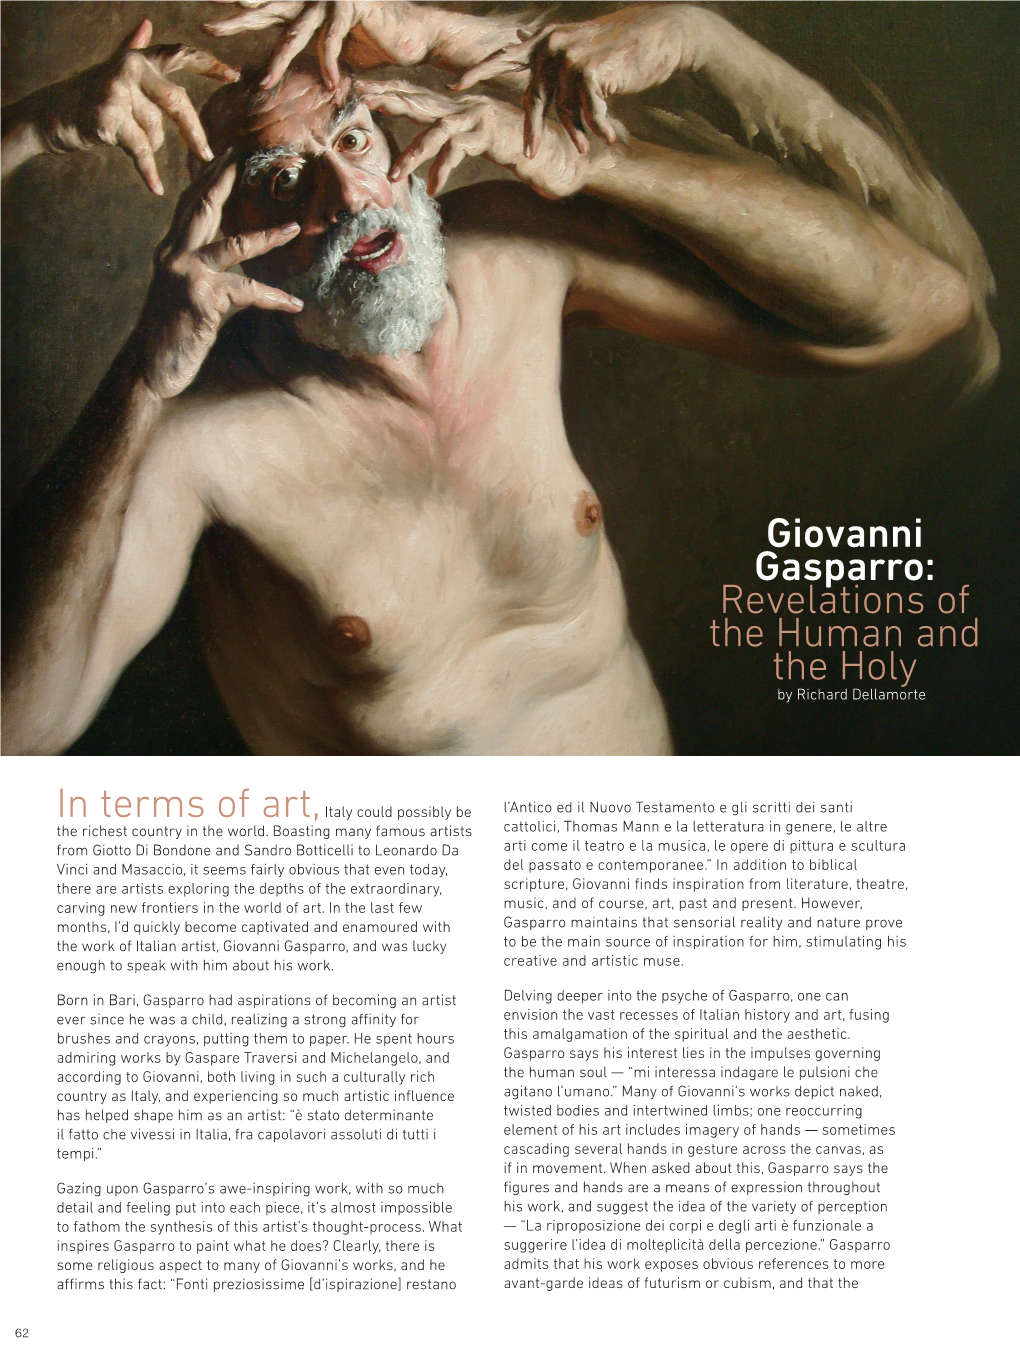 Giovanni Gasparro: Revelations of the Human and the Holy by Richard Dellamorte